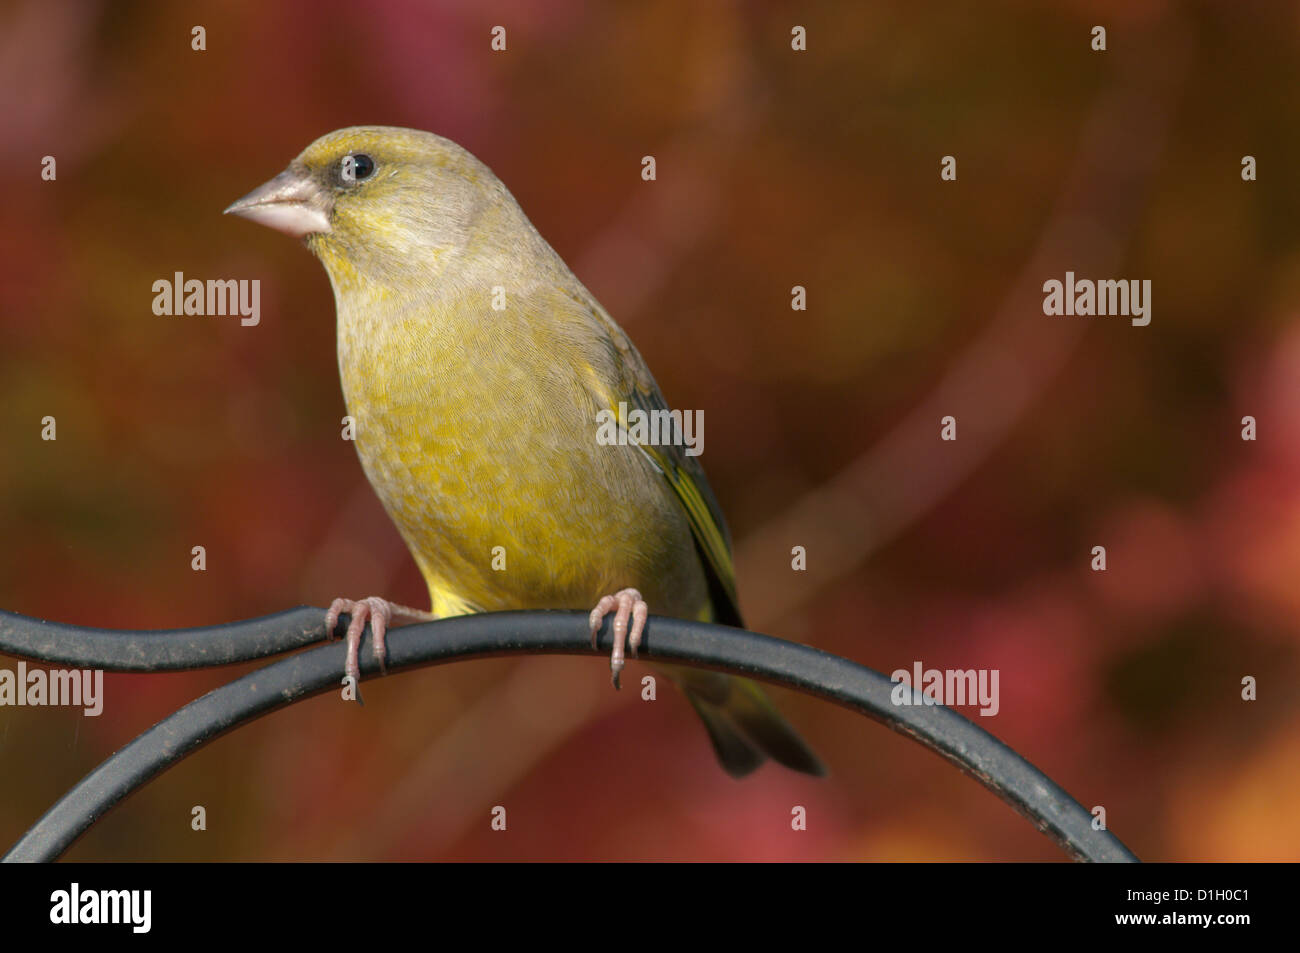 Greenfinch [Carduelis chloris] perched in front of maple tree. November, West Sussex, England, UK. Stock Photo